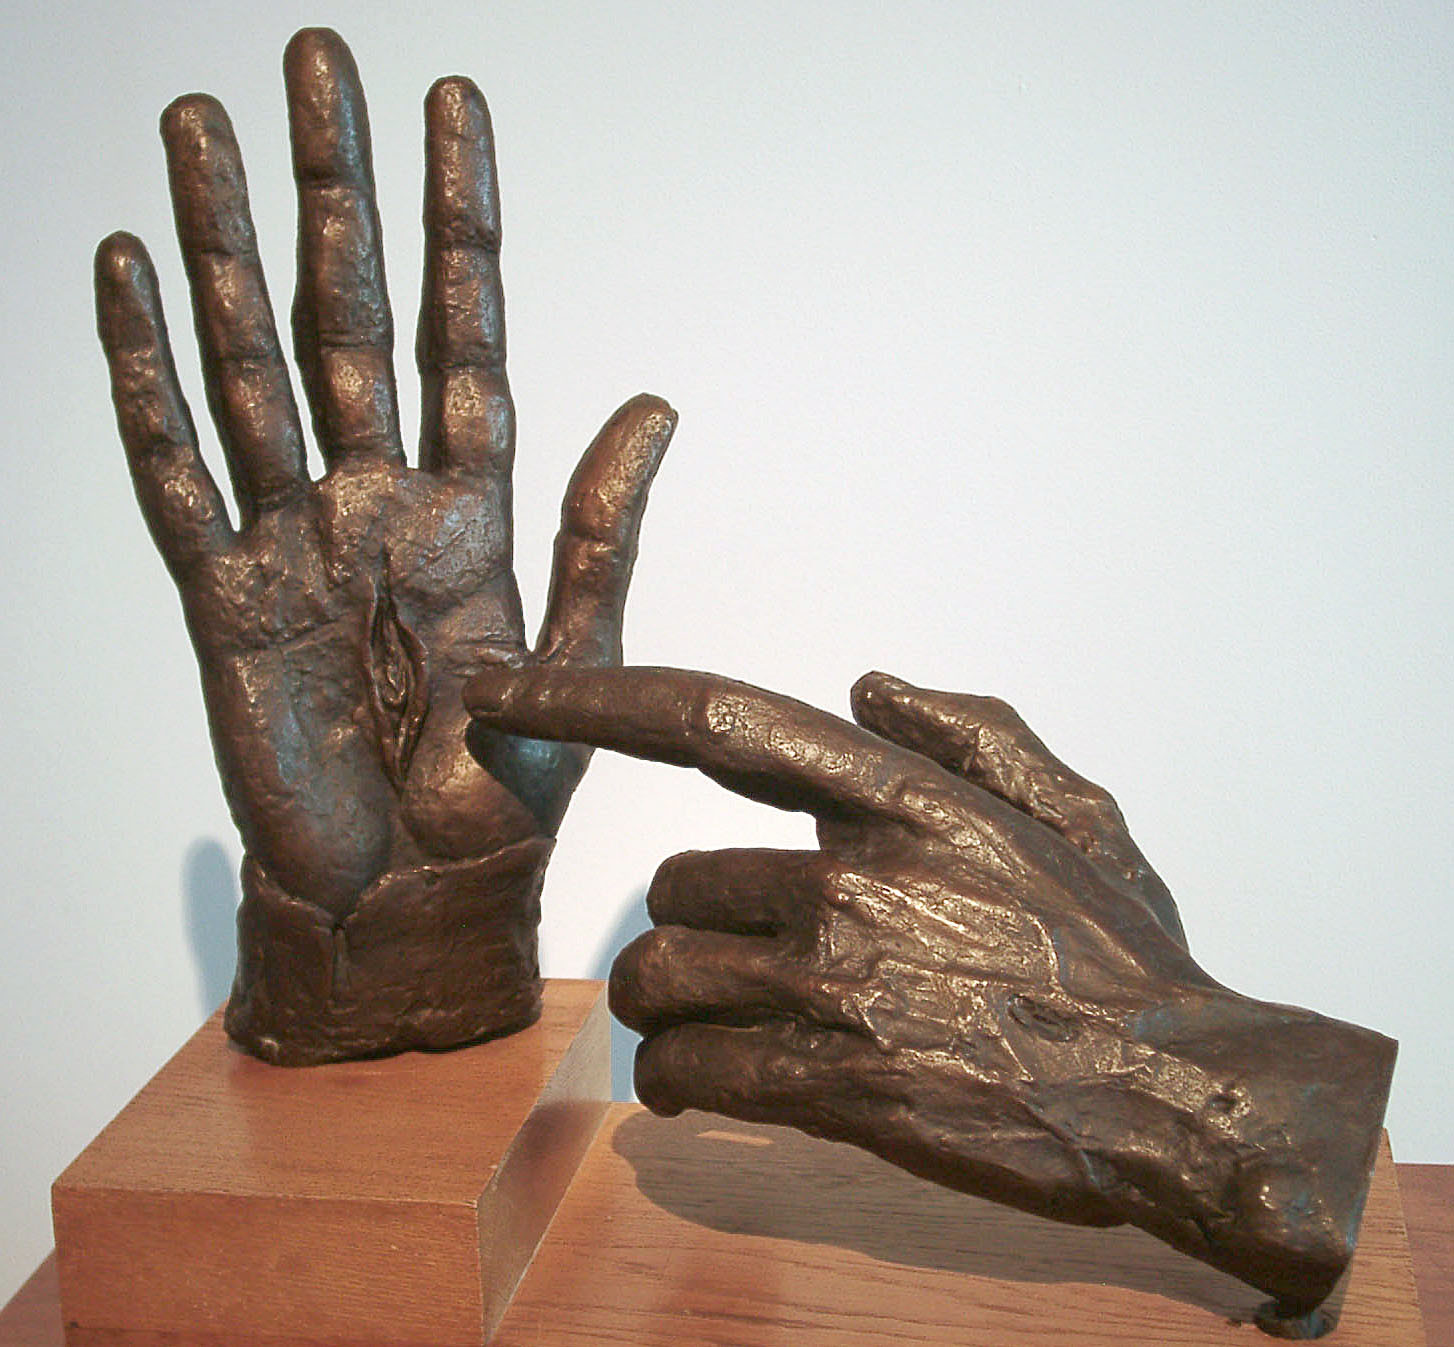 The hands of the risen Christ - Jacob Epstein.